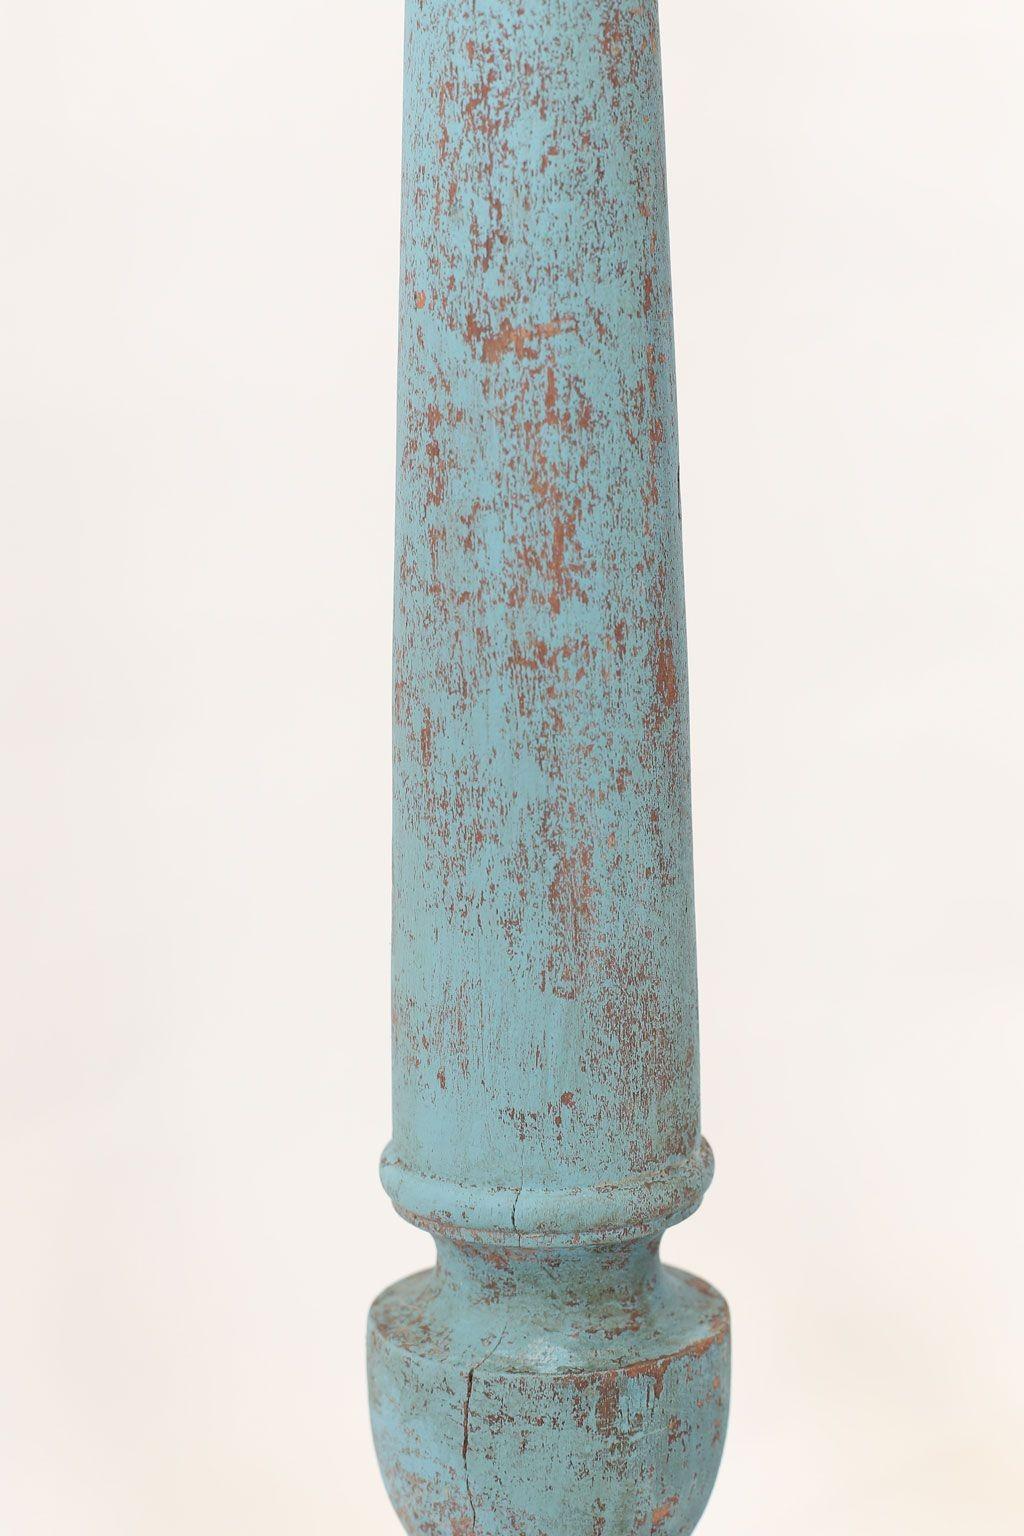 Mid-20th Century Vintage Teal-Blue Painted Candlestick